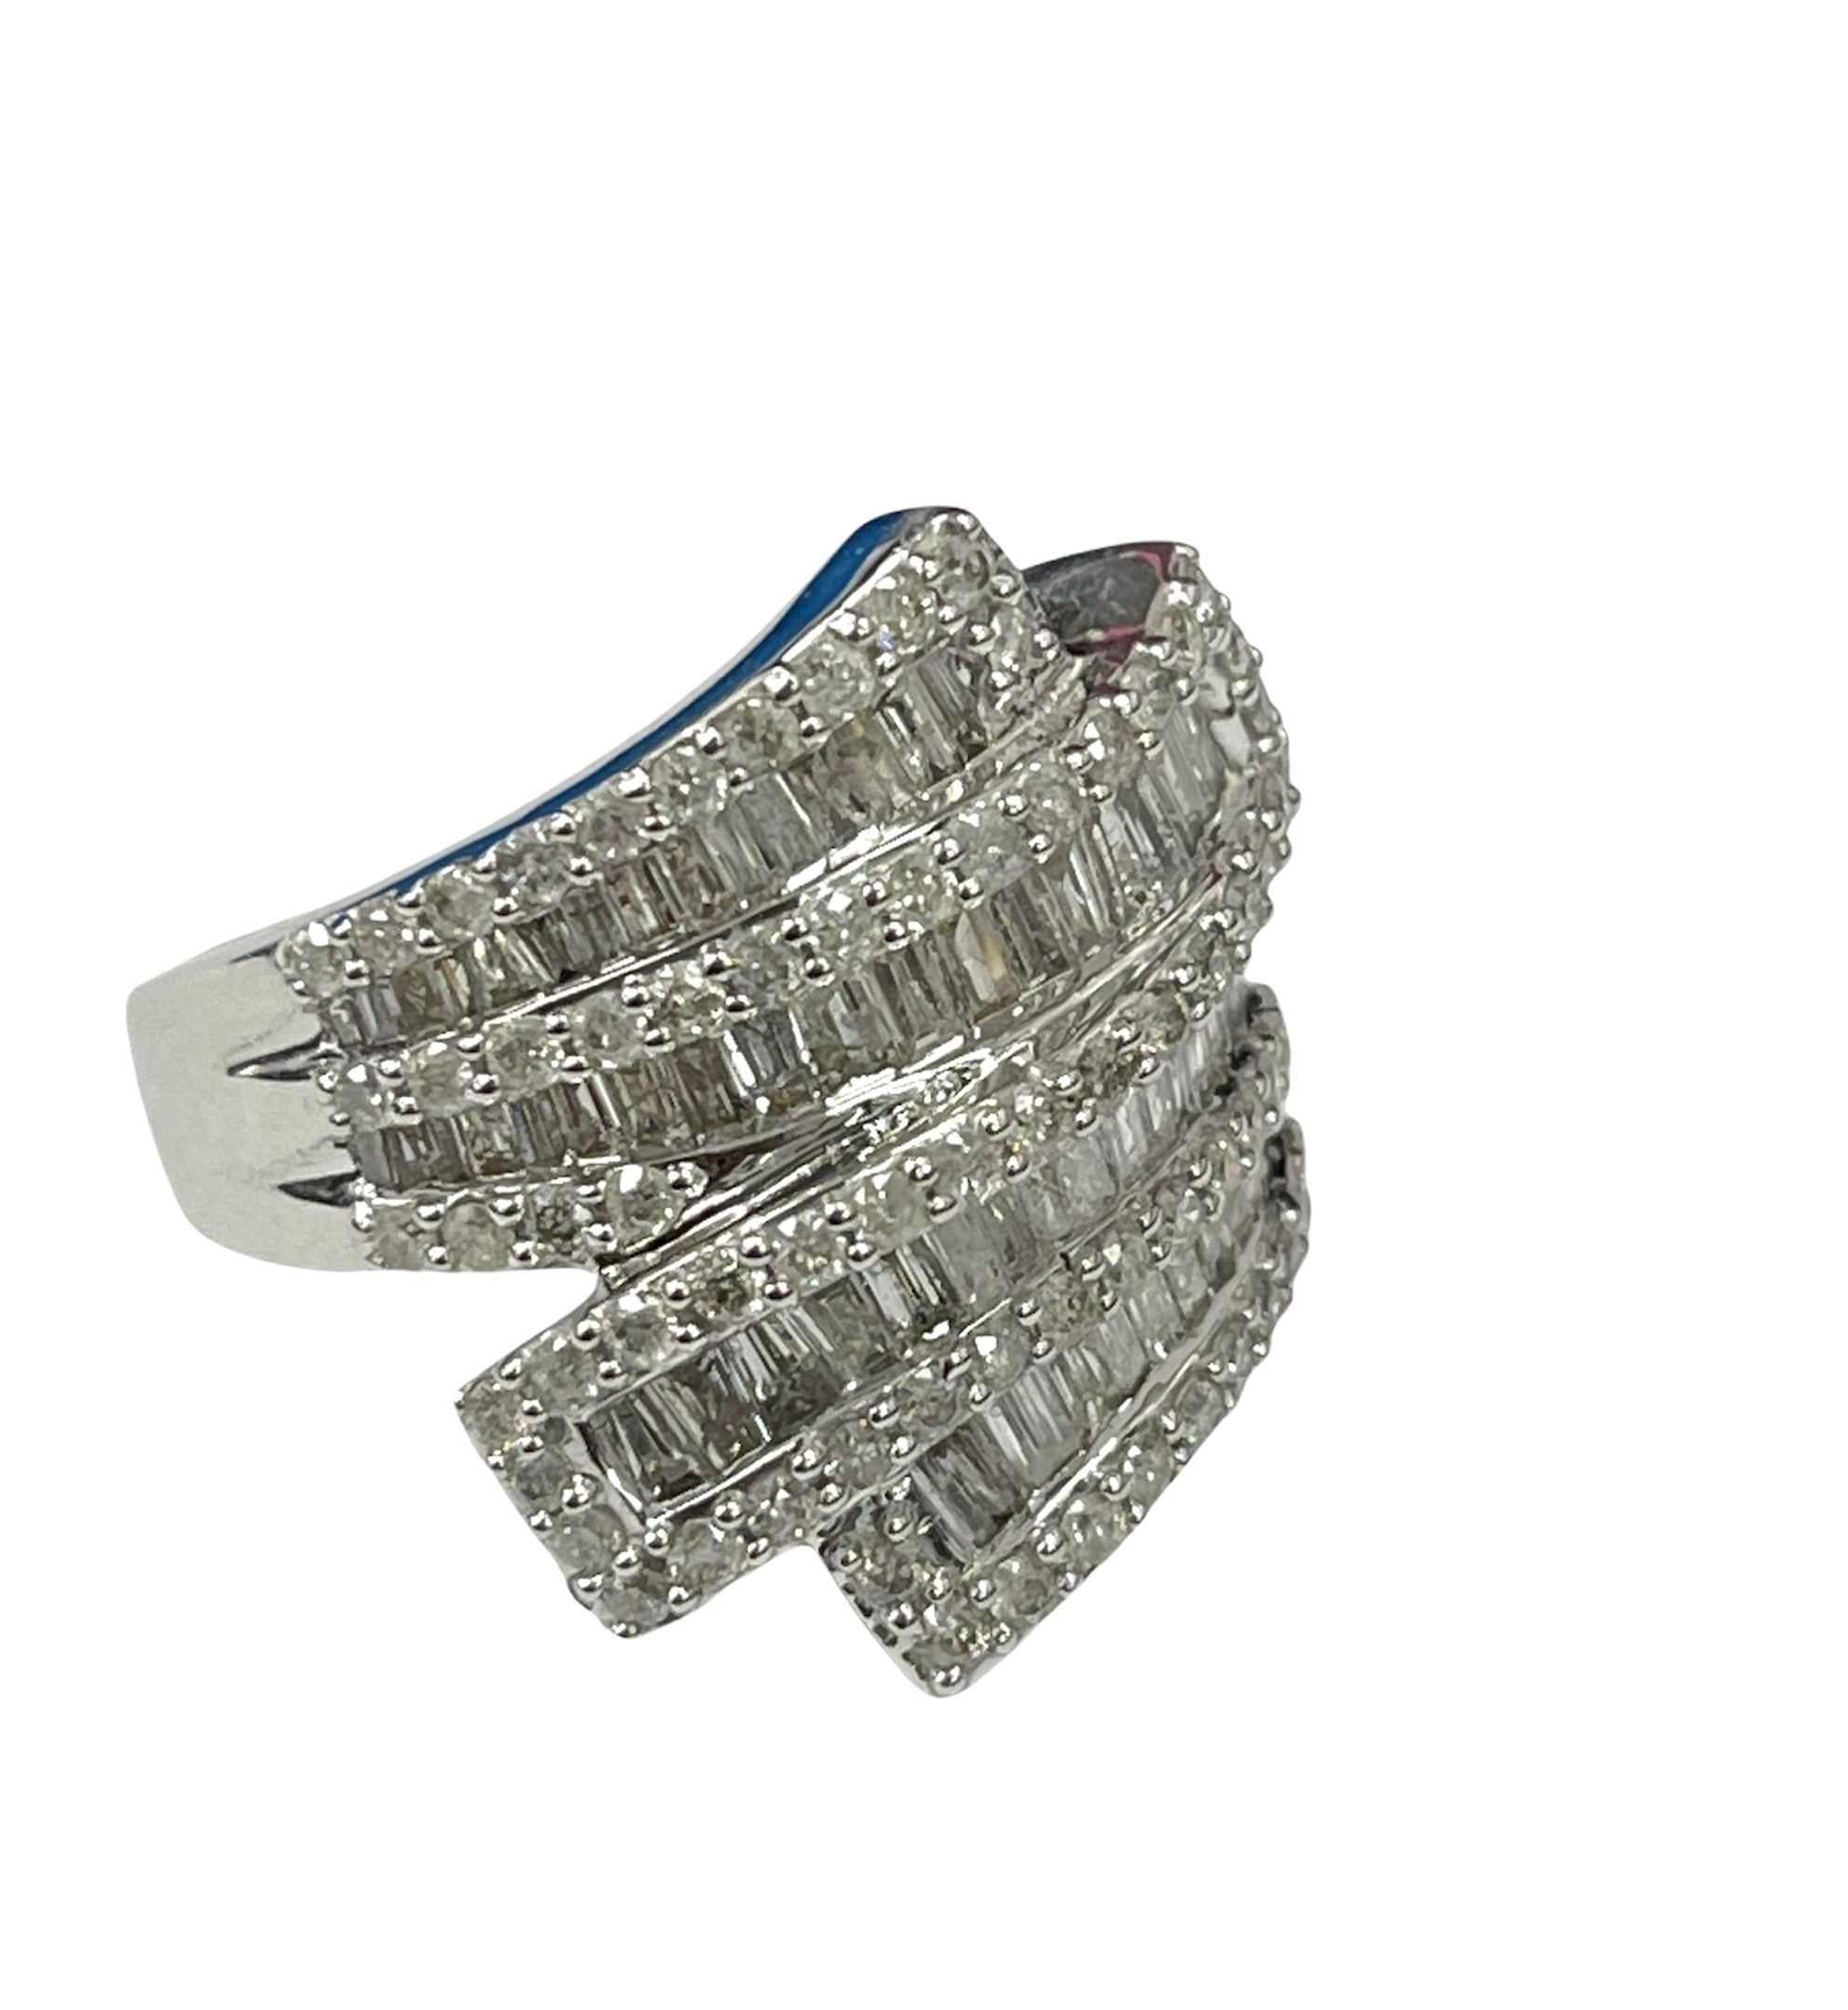 Baguettes Four Rows Flowing Diamond Ring with Round Brilliants Accents 14kt